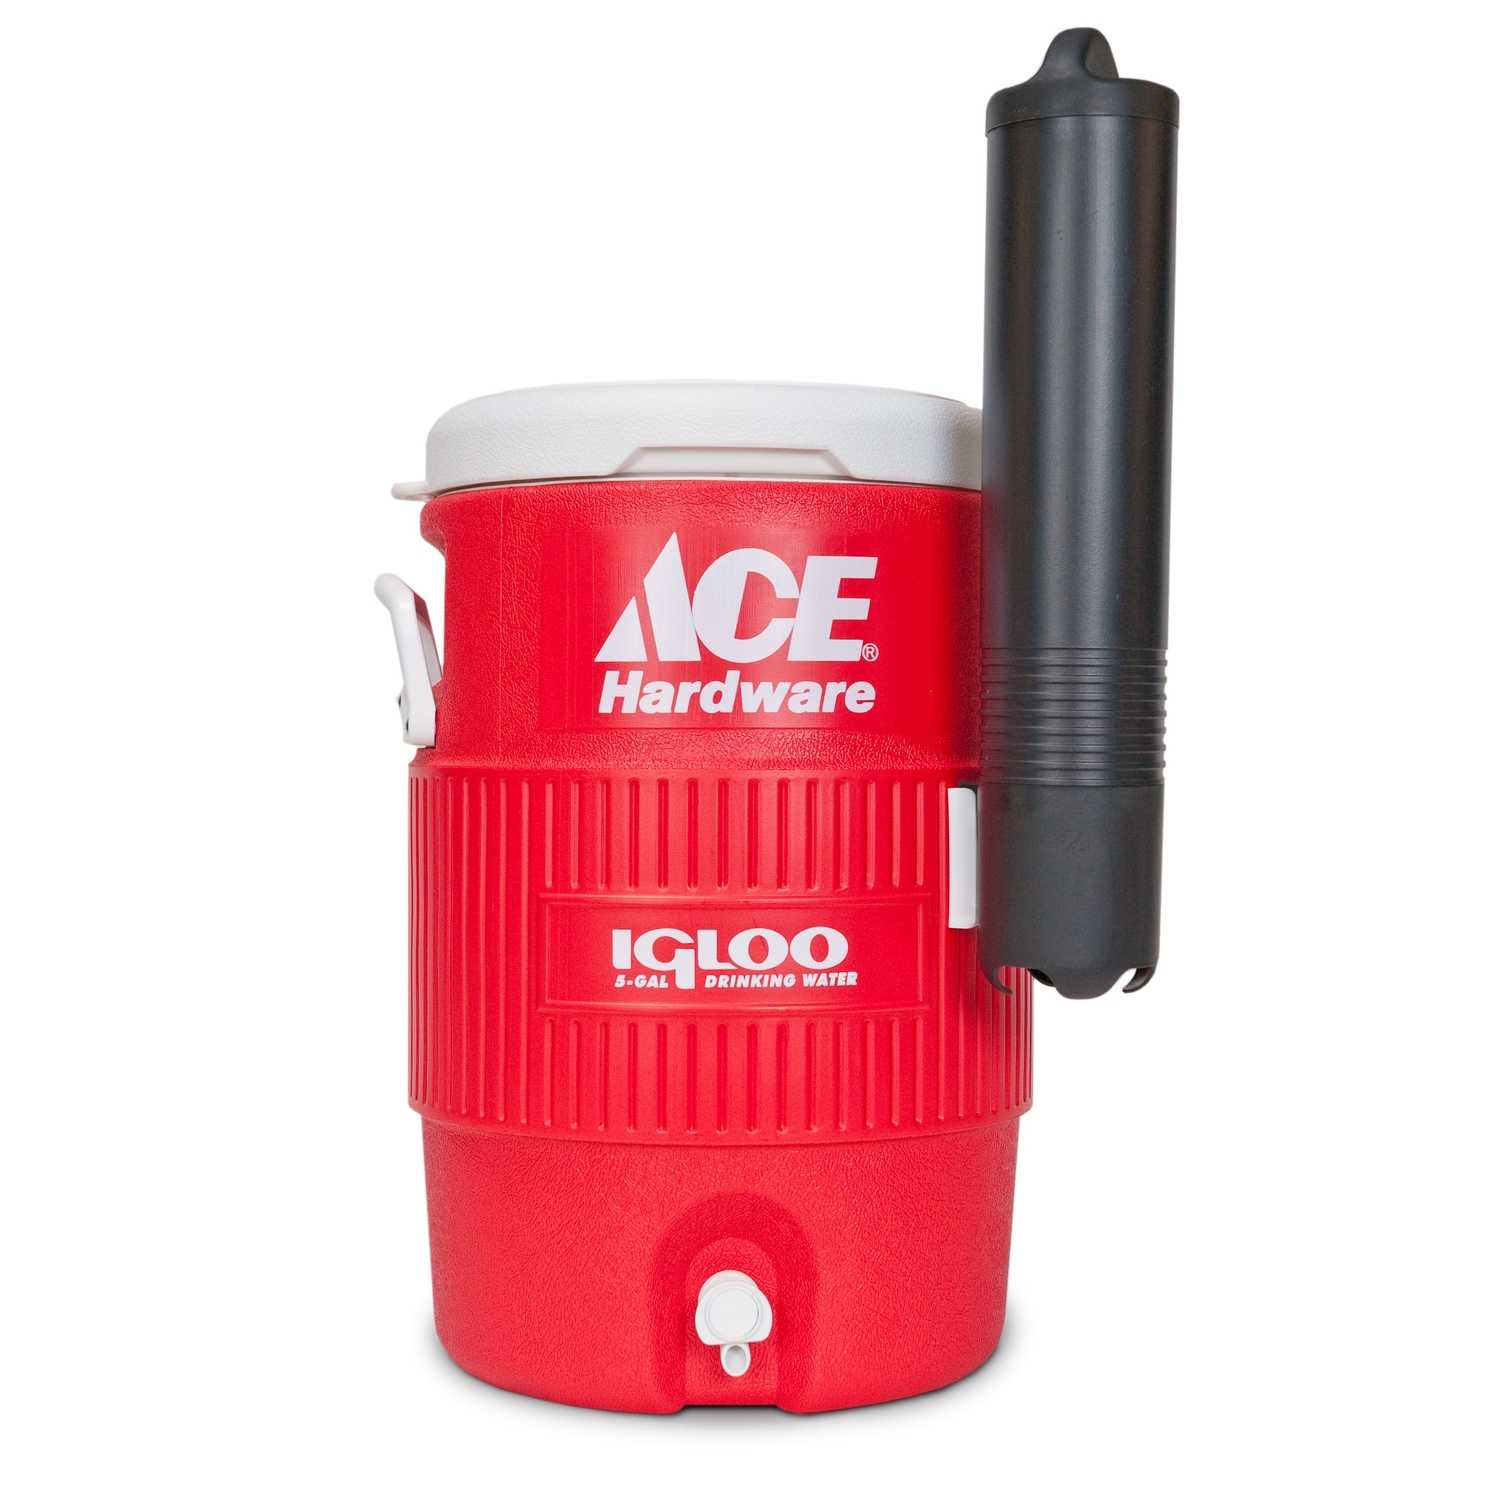 Igloo Ace  Water Cooler  5 gal Red Ace  Hardware 